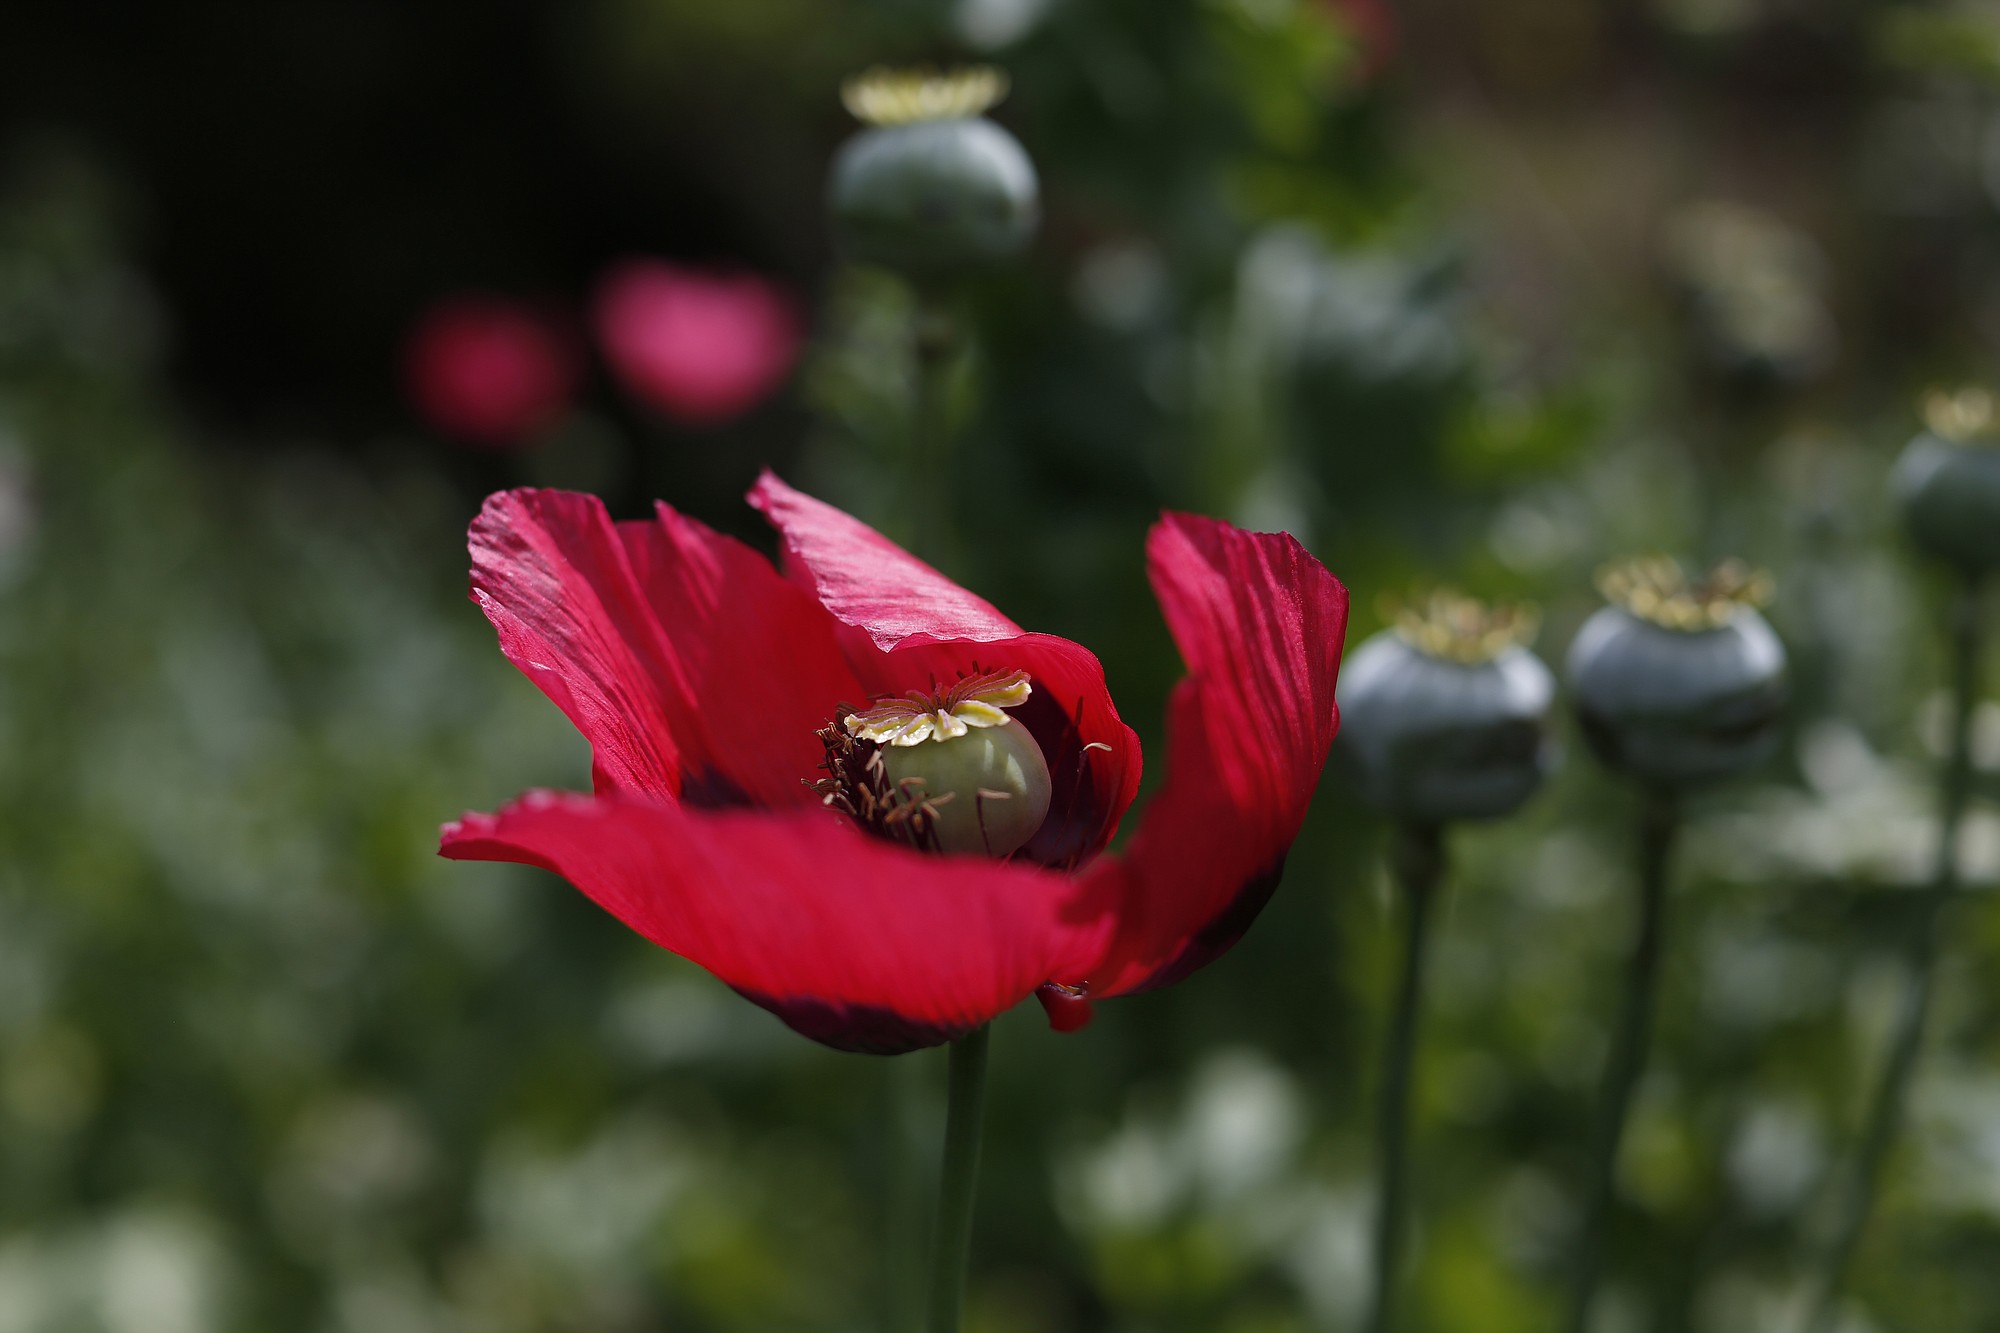 Poppy flowers grow in the mountains of the Sierra Madre del Sur in Guerrero state, Mexico.